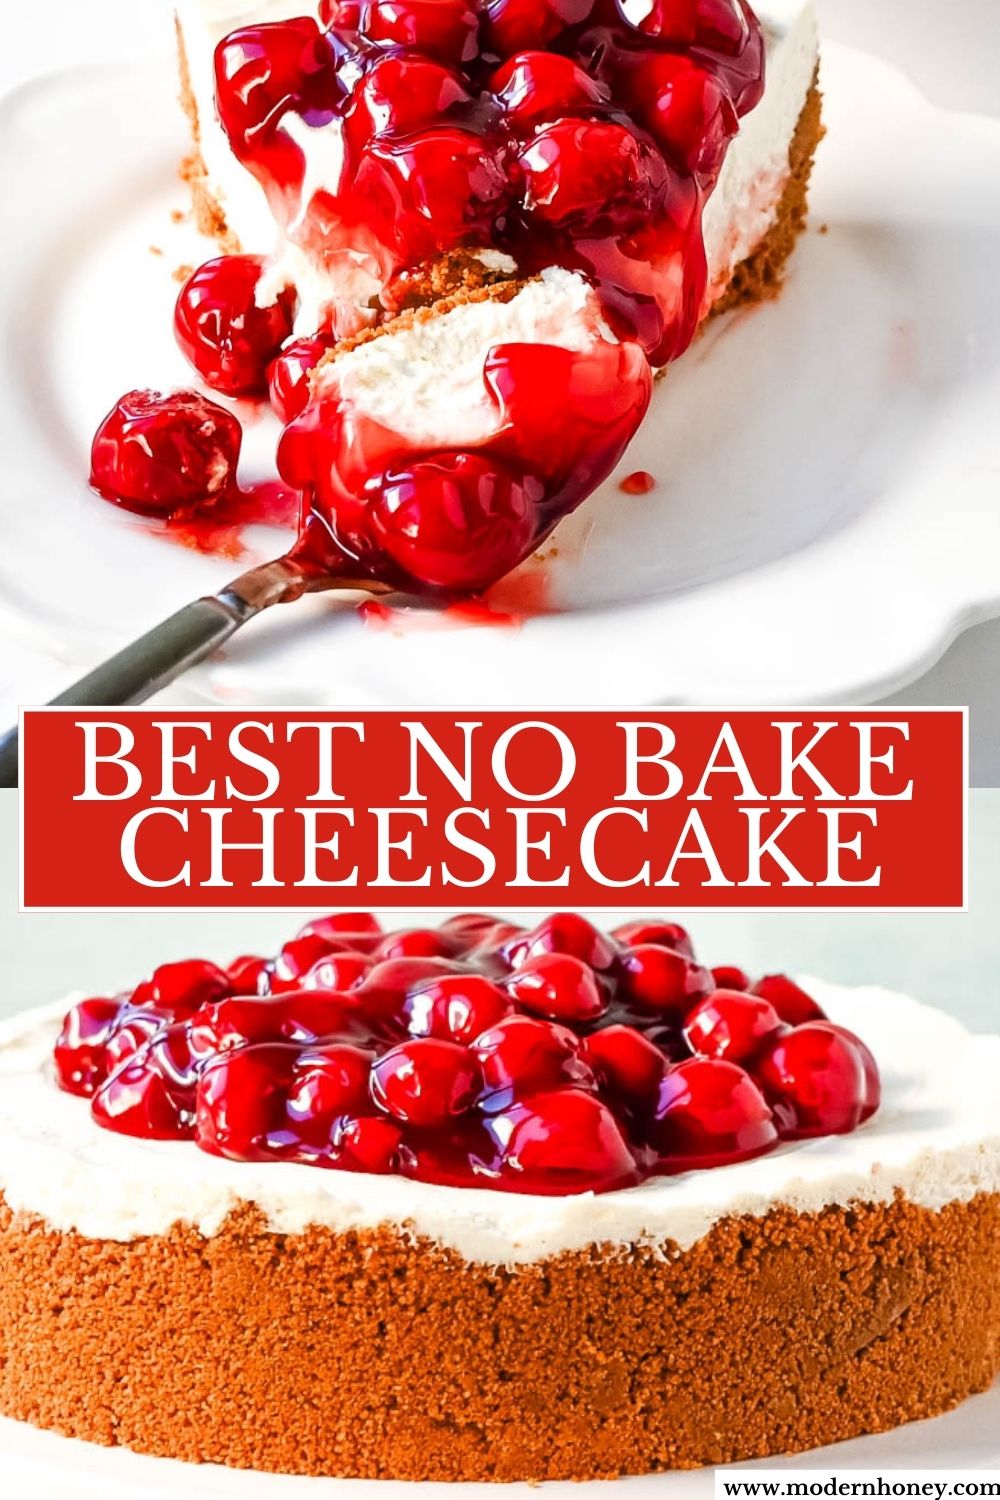 No Bake Cheesecake Recipe. This easy no bake cheesecake is made with only 7 ingredients and doesn't require baking in the oven. It has a light, creamy, velvety and rich cheesecake filling paired with a buttery crust. It is the perfect no bake dessert recipe.